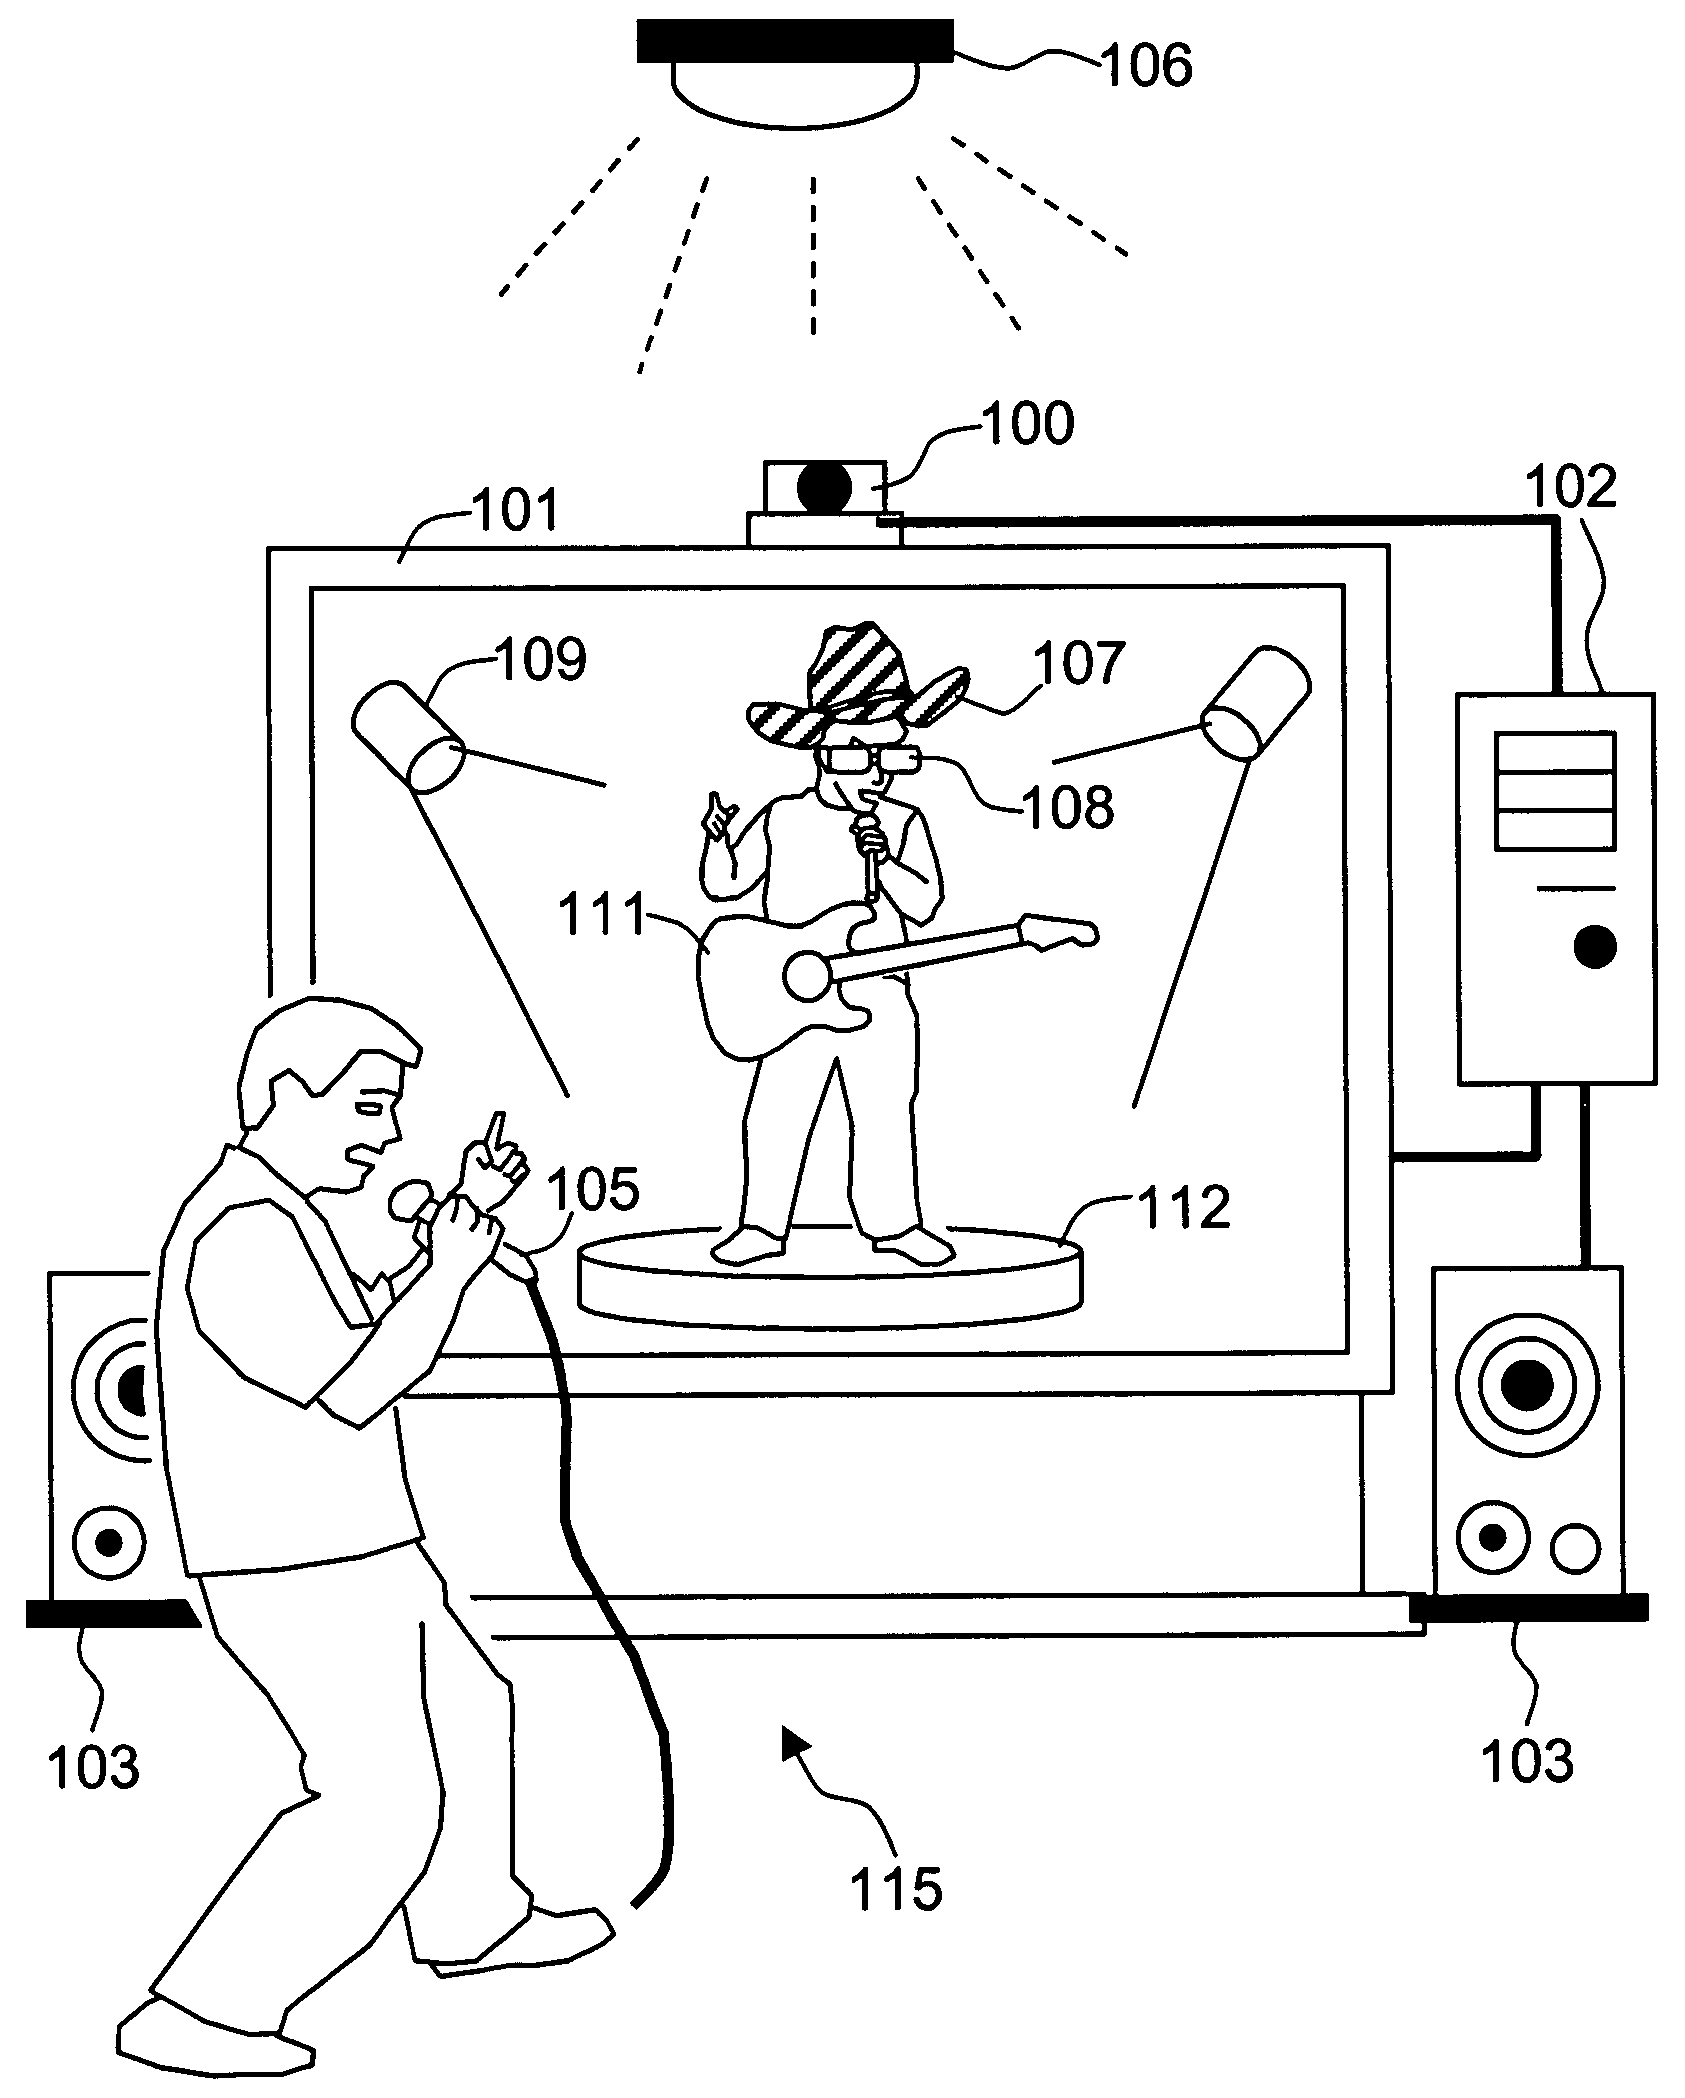 Method and system for enhancing virtual stage experience